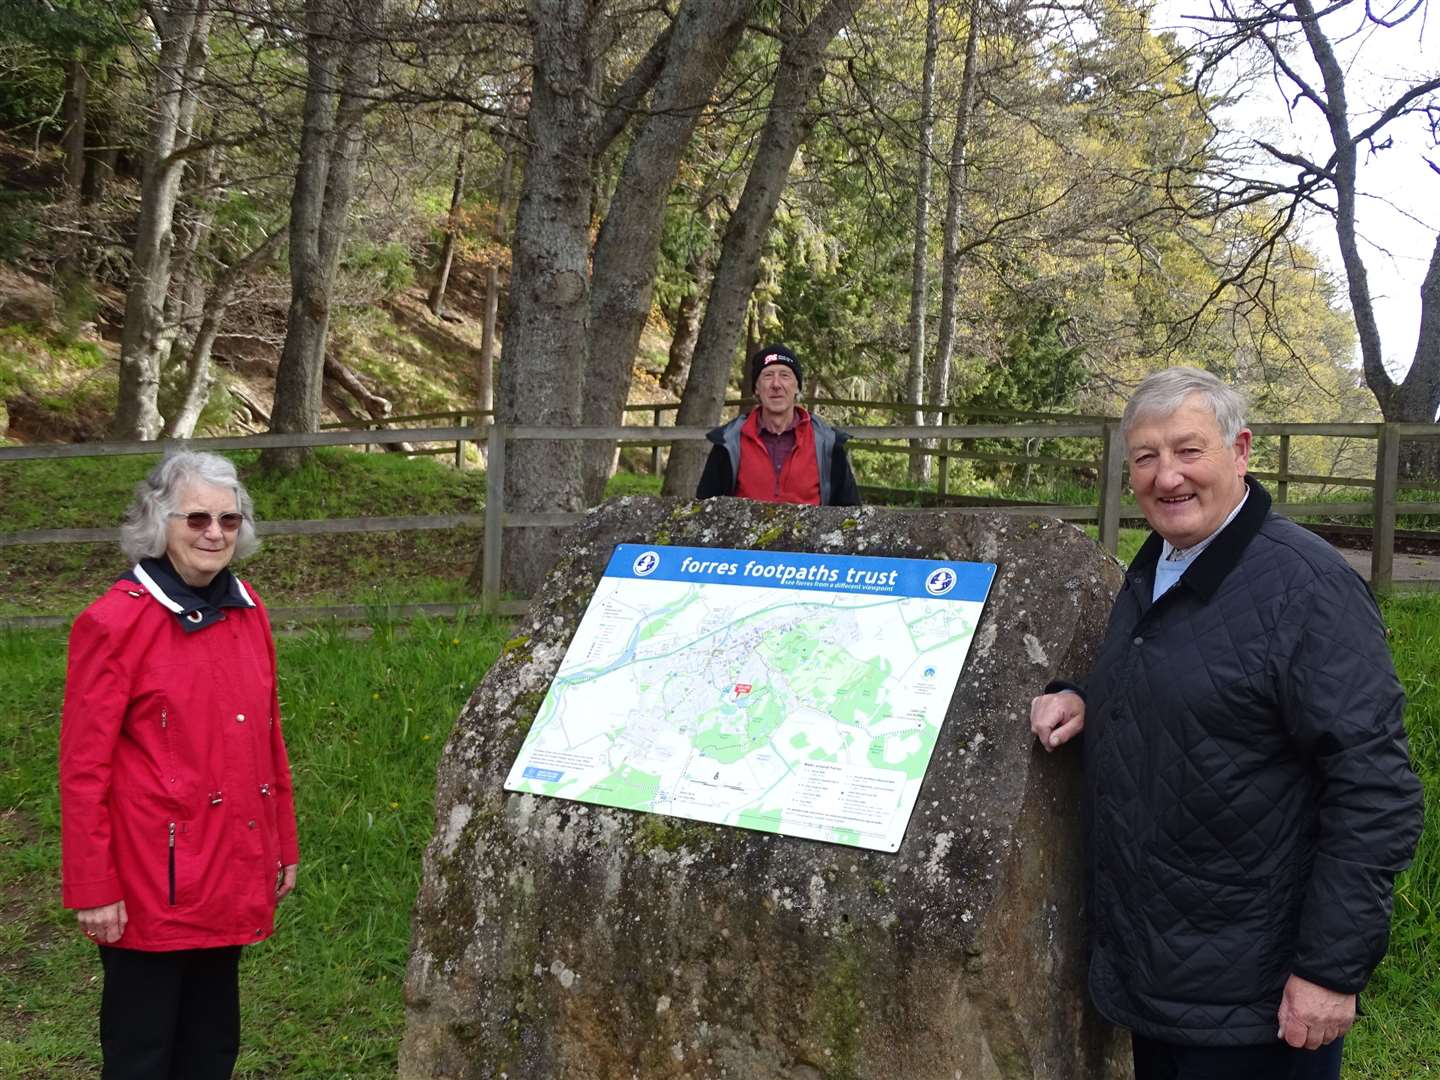 Forres Footpaths Trust members Dorothy Scott, David Binney and Wilson Metcalfe admiring one of the new map panels at Sanquhar car park.